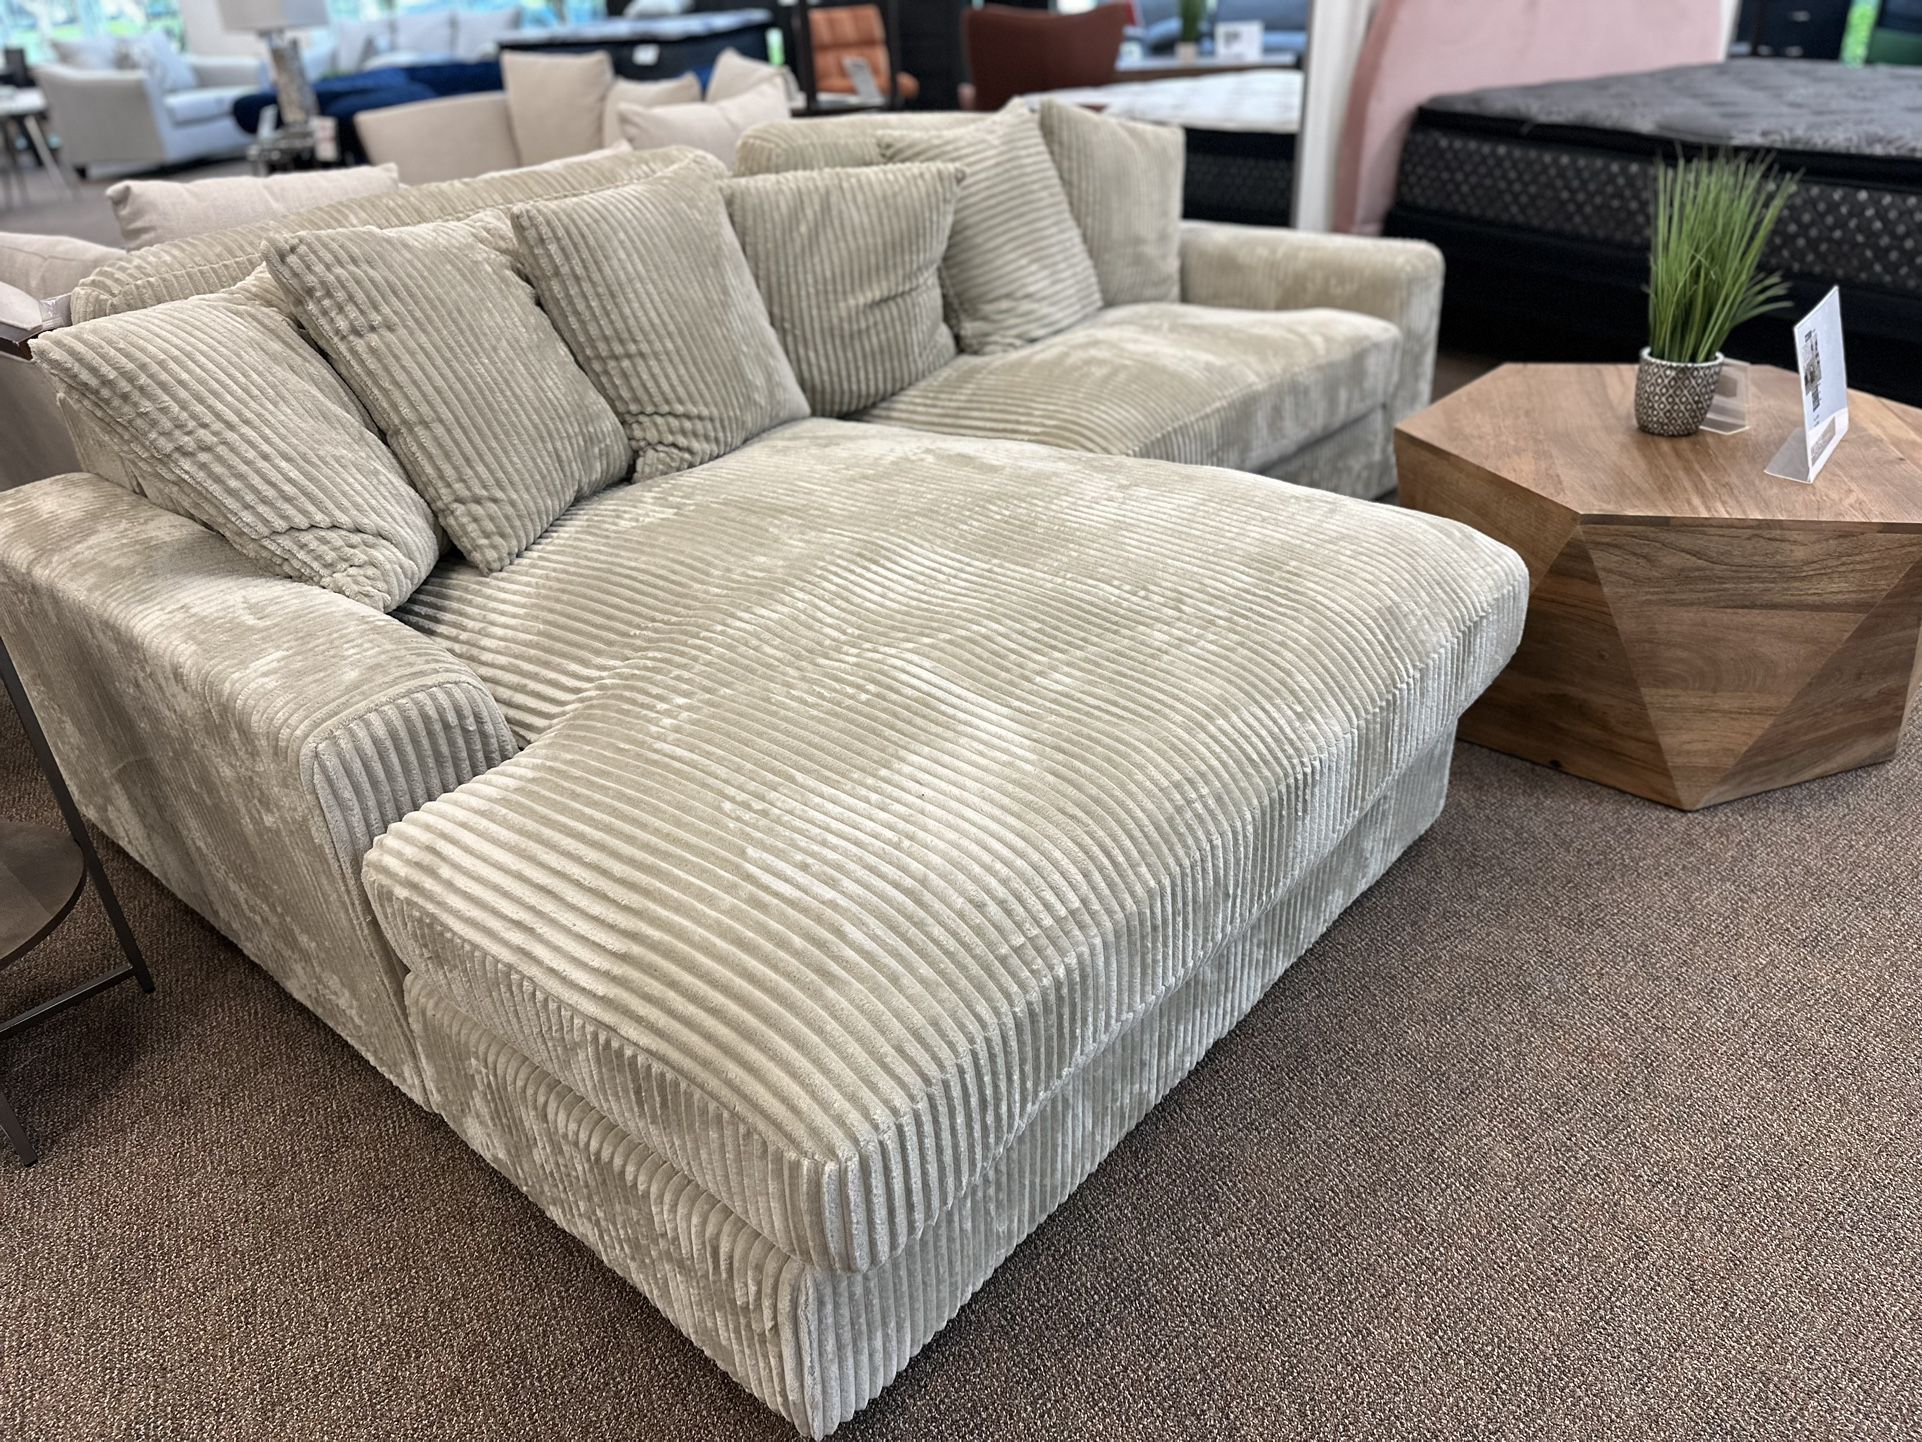 Brand new sectional in box- shop now pay later $49 down. 🔥Free Delivery And Assembly🔥 